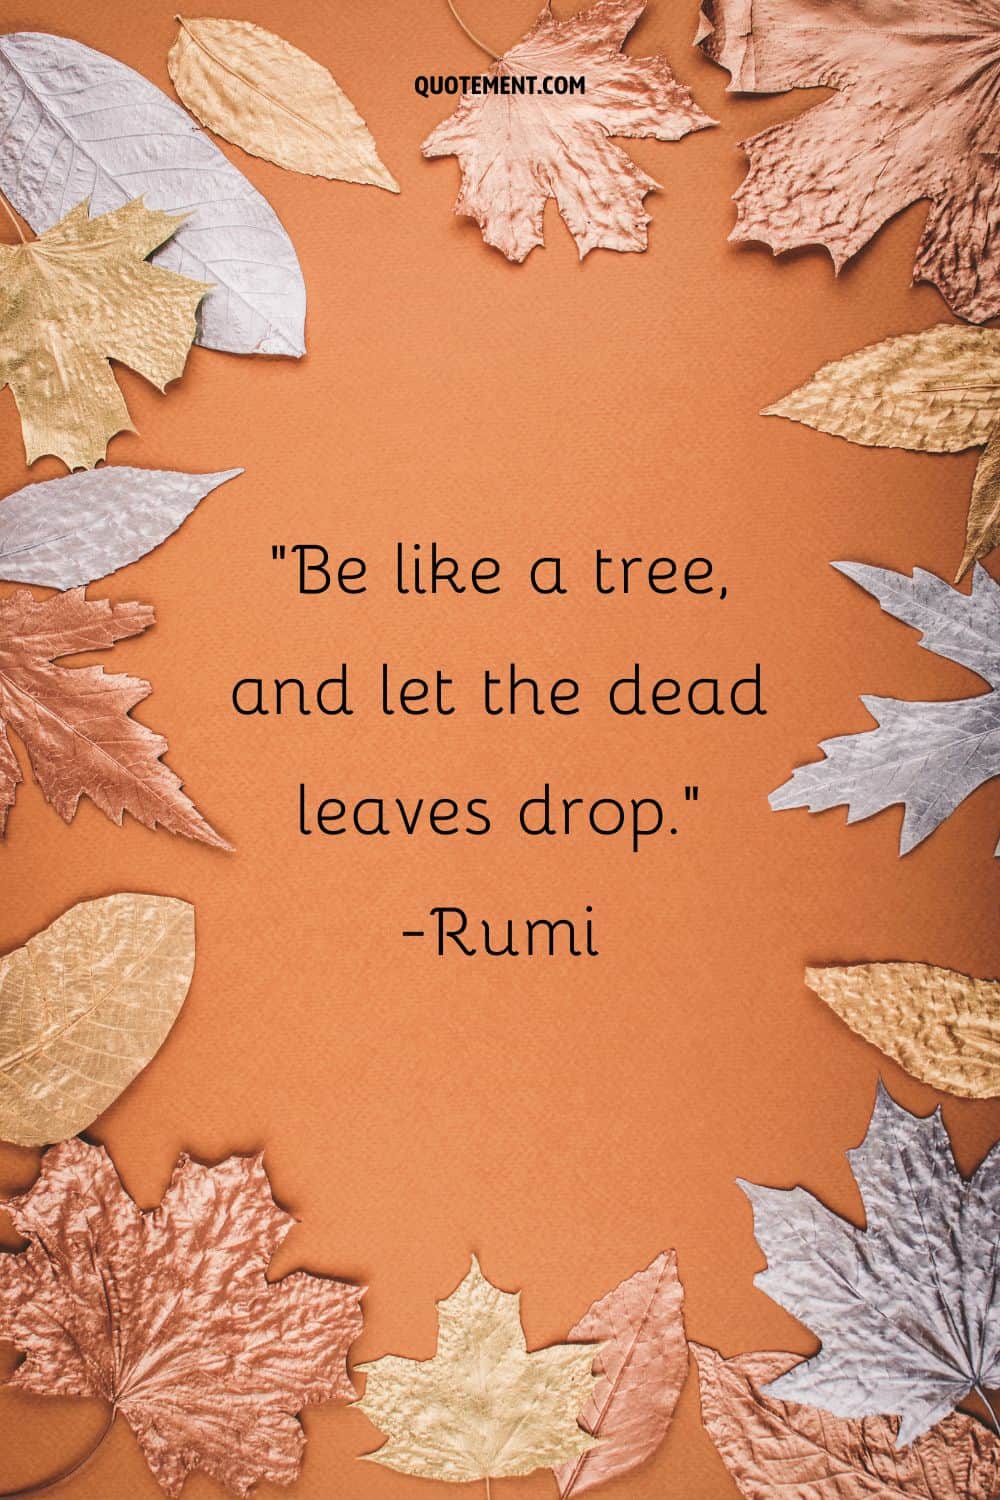 Magical autumn leaves representing an autumn quote.